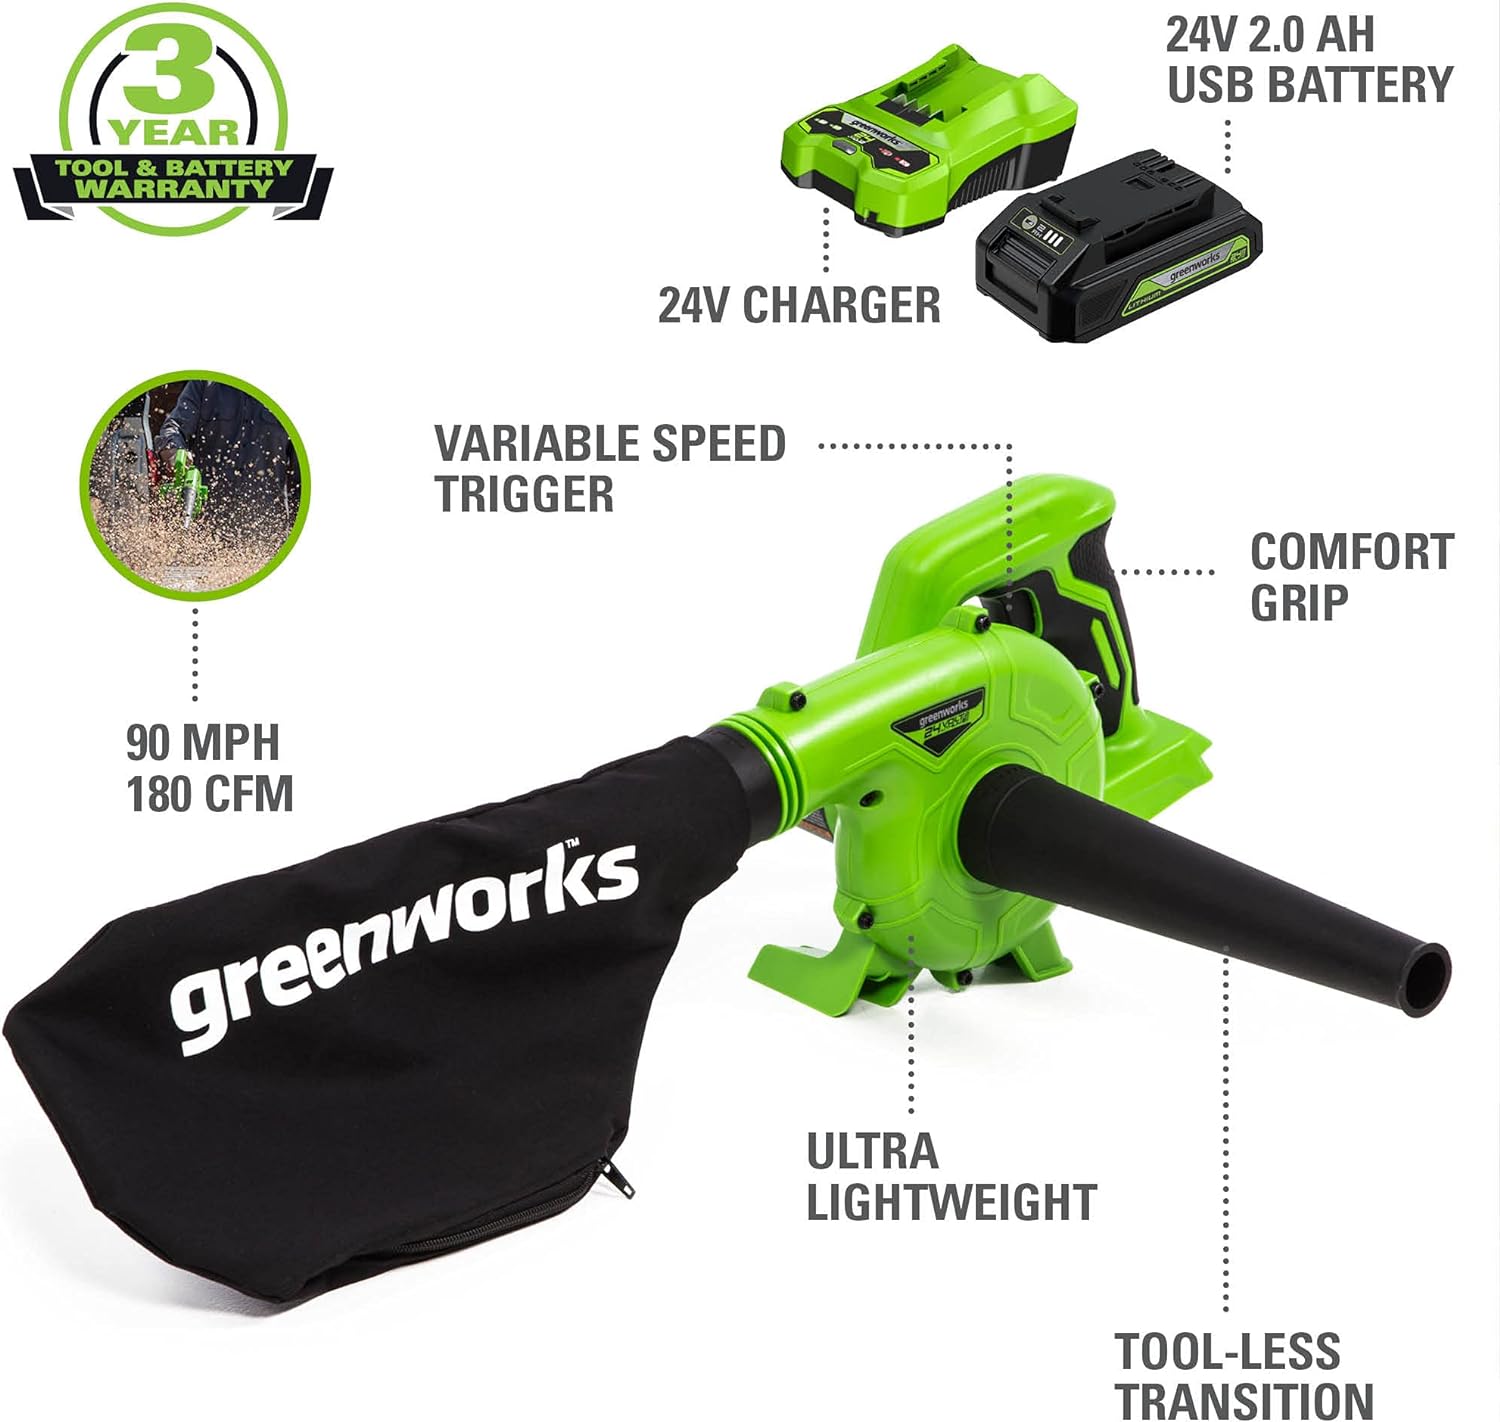 Greenworks 24V (90 MPH \/ 180 CFM \/ 125+ Compatible Tools) Cordless Shop Blower, 2.0Ah Battery and Charger Included